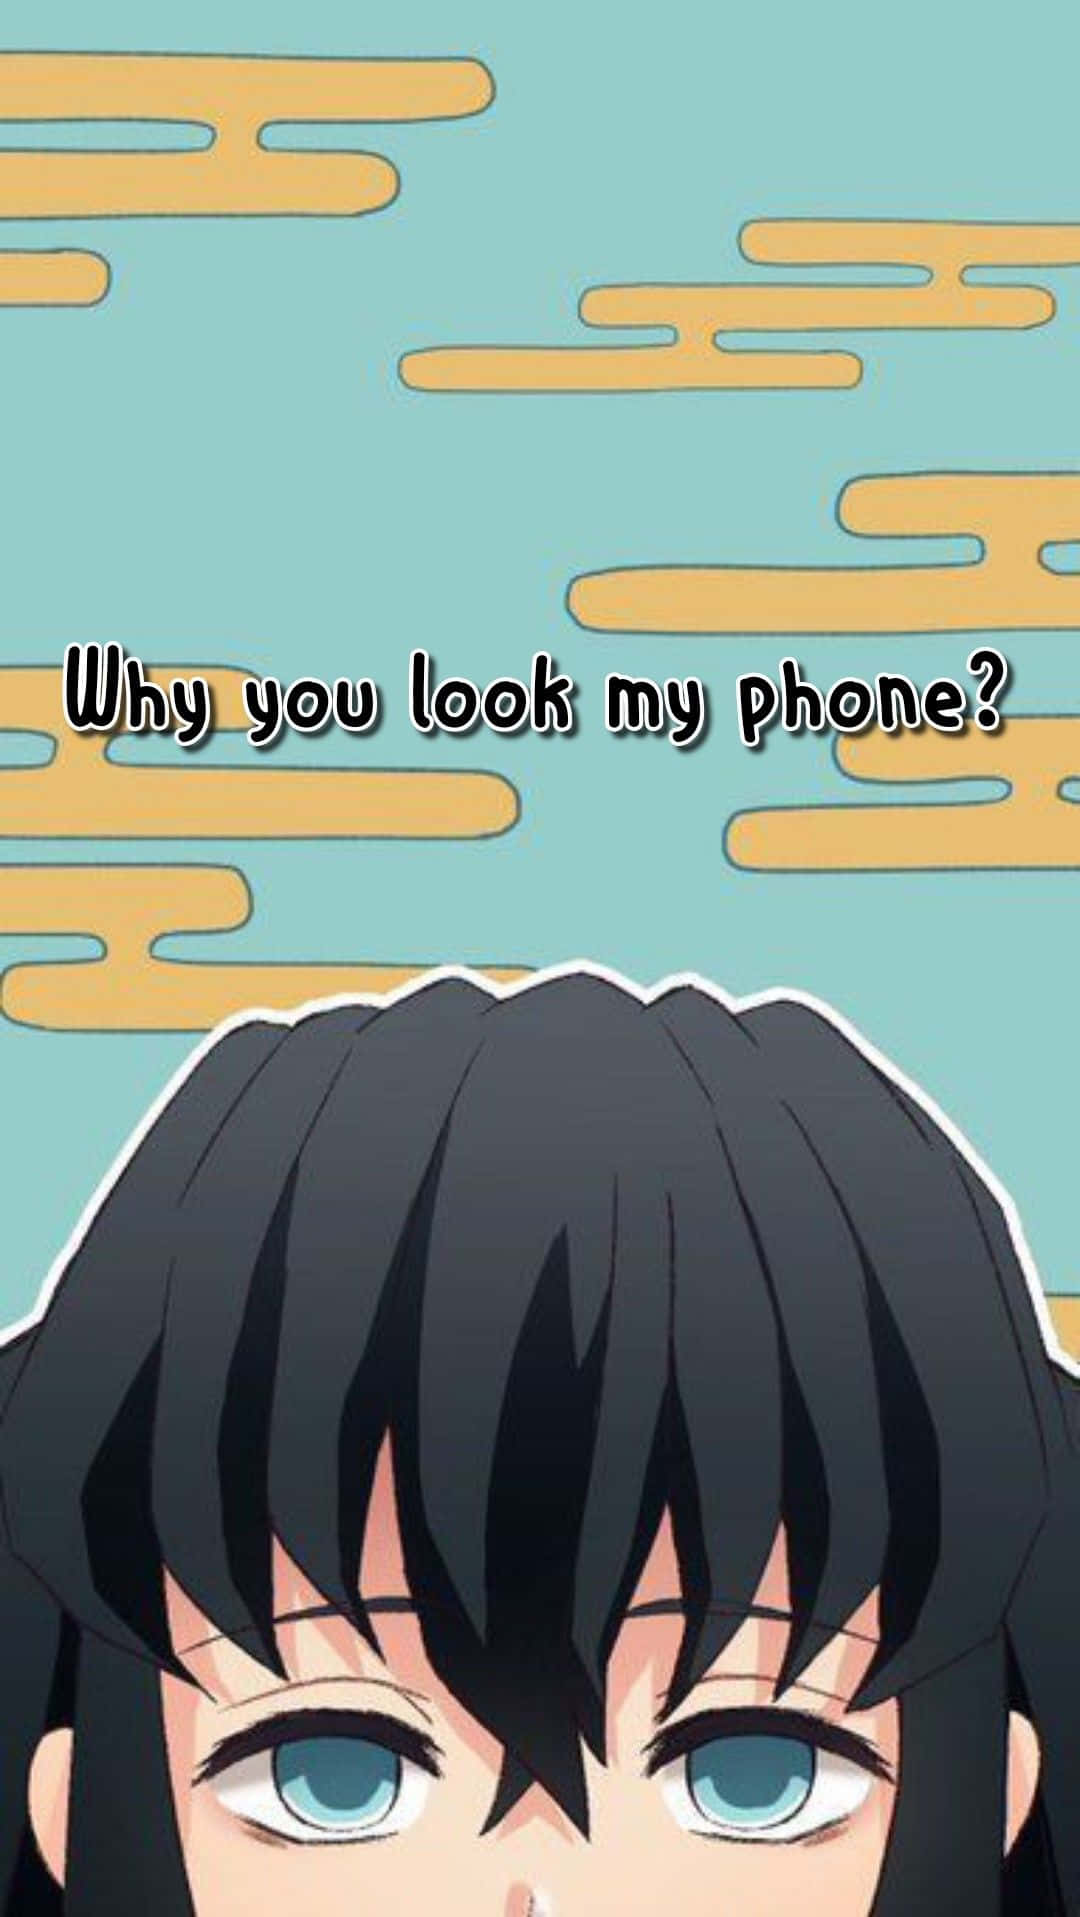 A Girl With Black Hair And A Phone With The Text Why You Look My Phone?